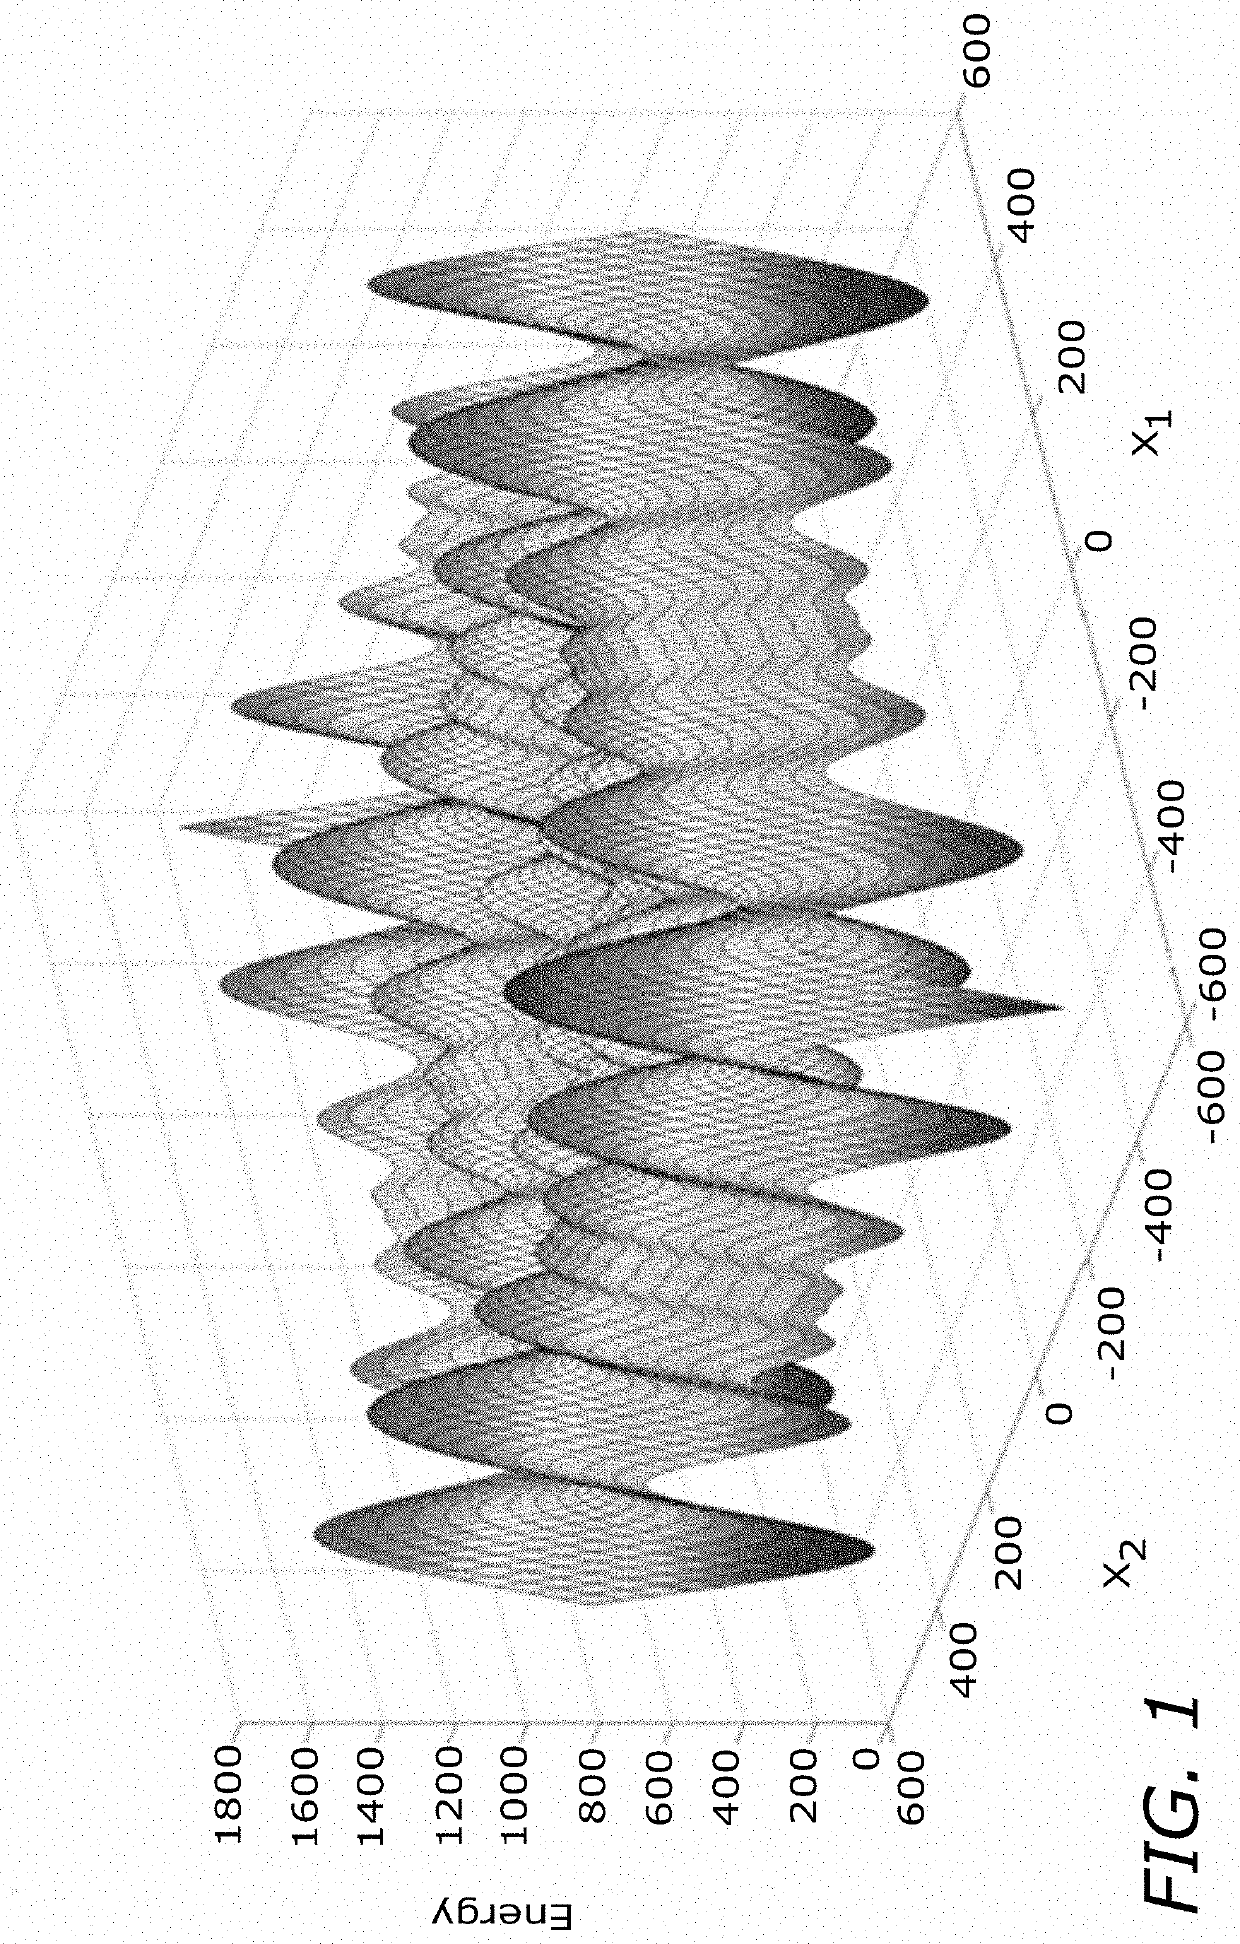 Using noise to speed convergence of simulated annealing and markov monte carlo estimations